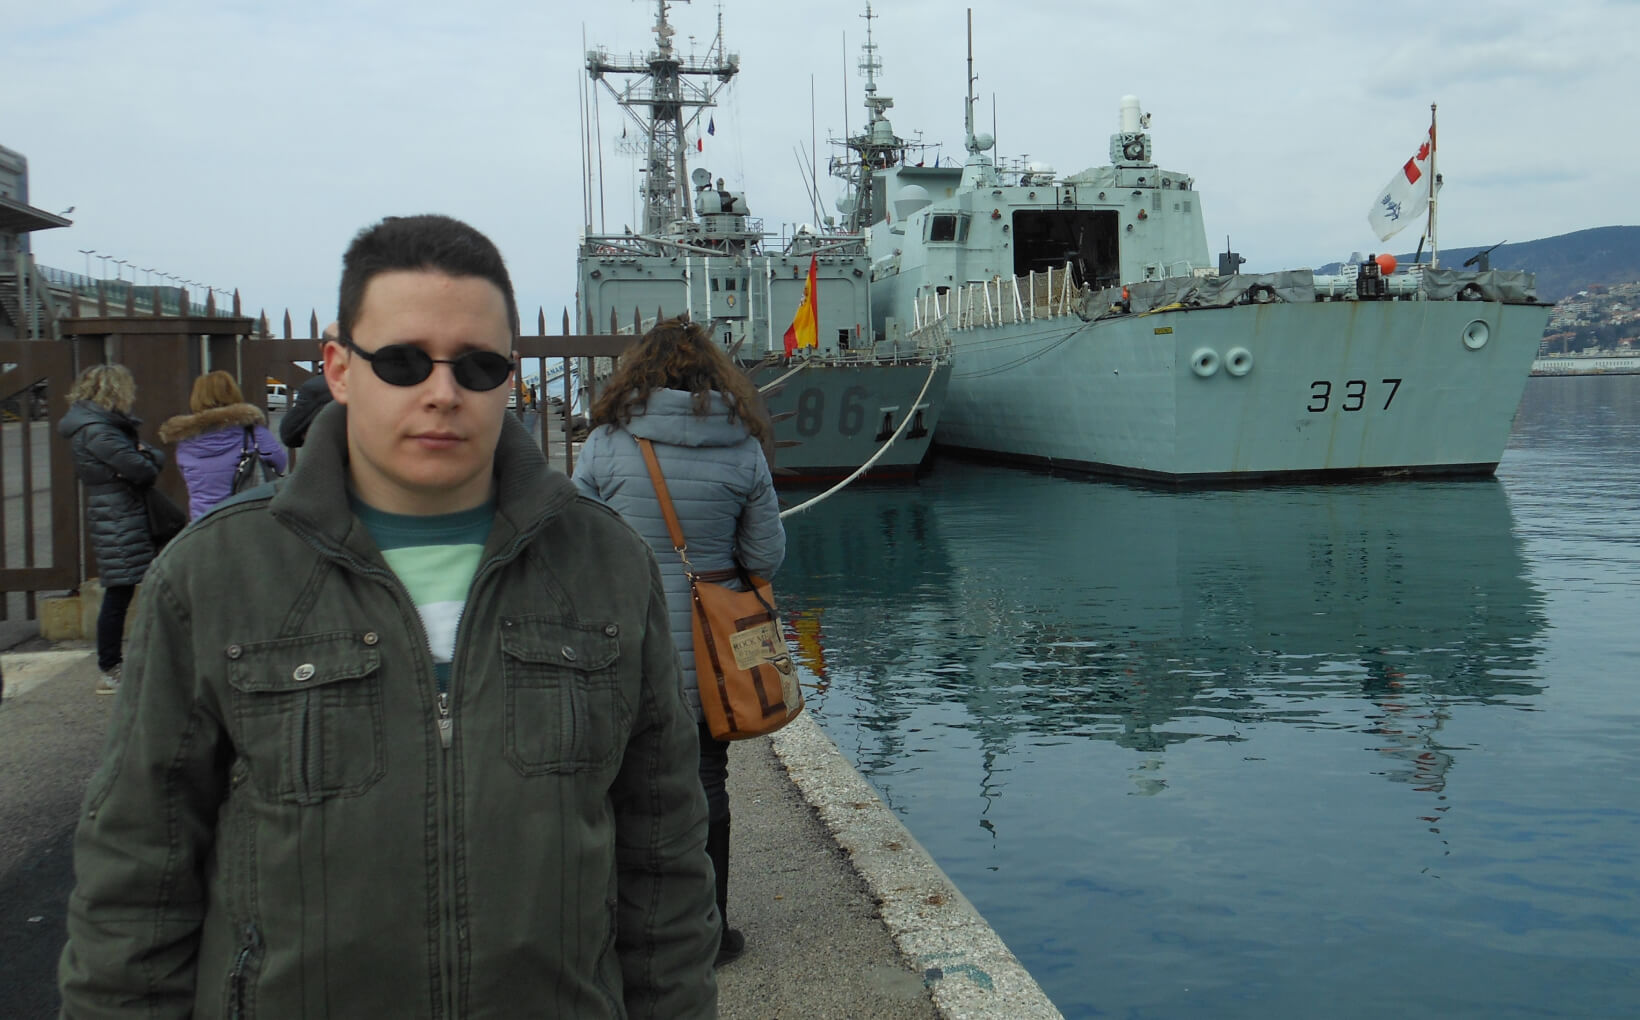 Milos standing at a harbor front with two large ships behind him.